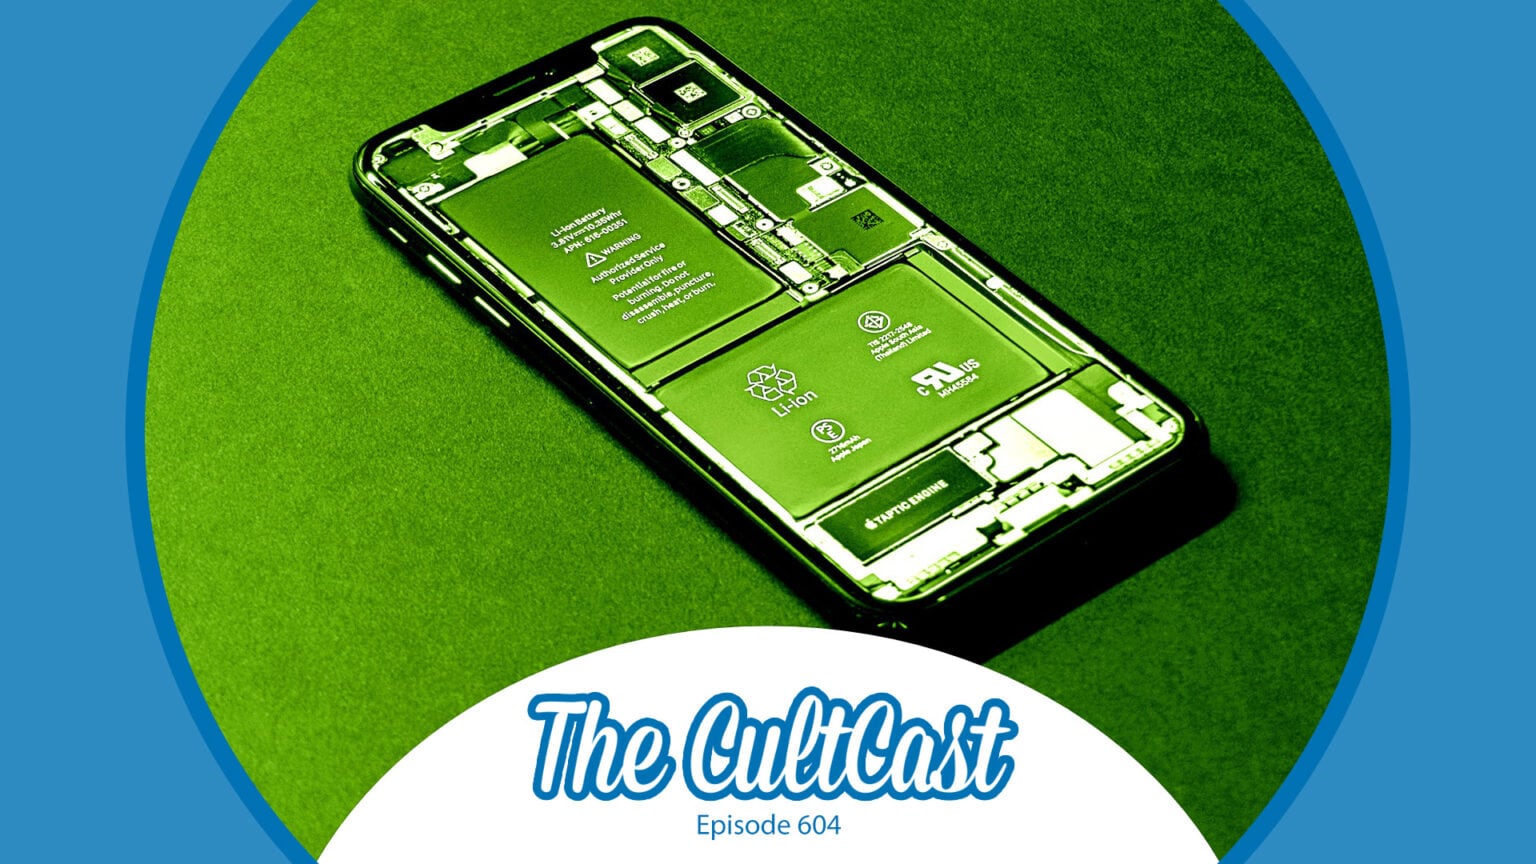 The CultCast Episode 604: An iPhone battery rumor gets us excited.